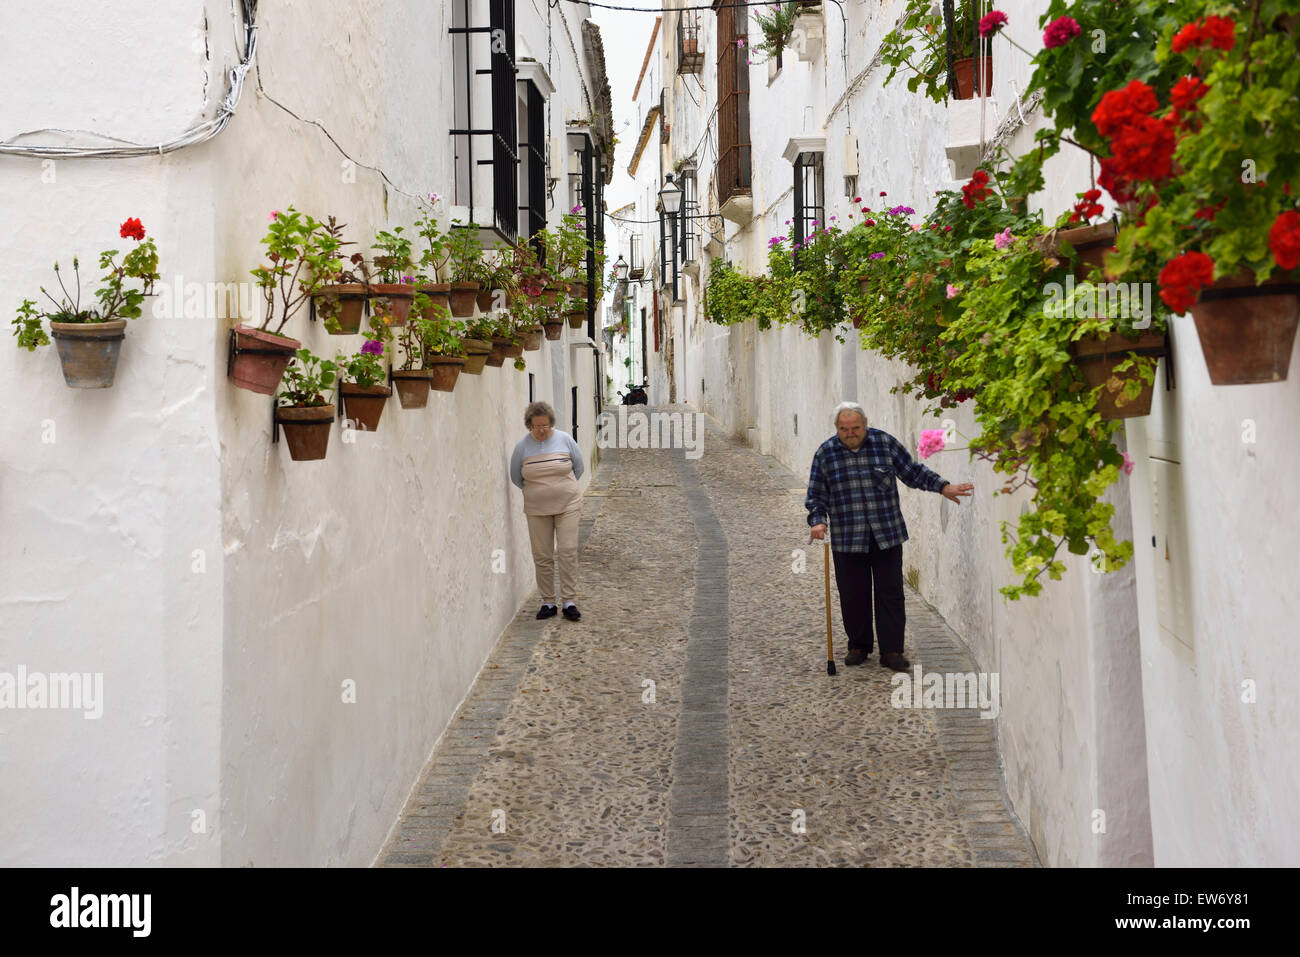 Older couple walking along whitewashed walls with pots of geranium flowers in Arcos de la Frontera Spain Stock Photo